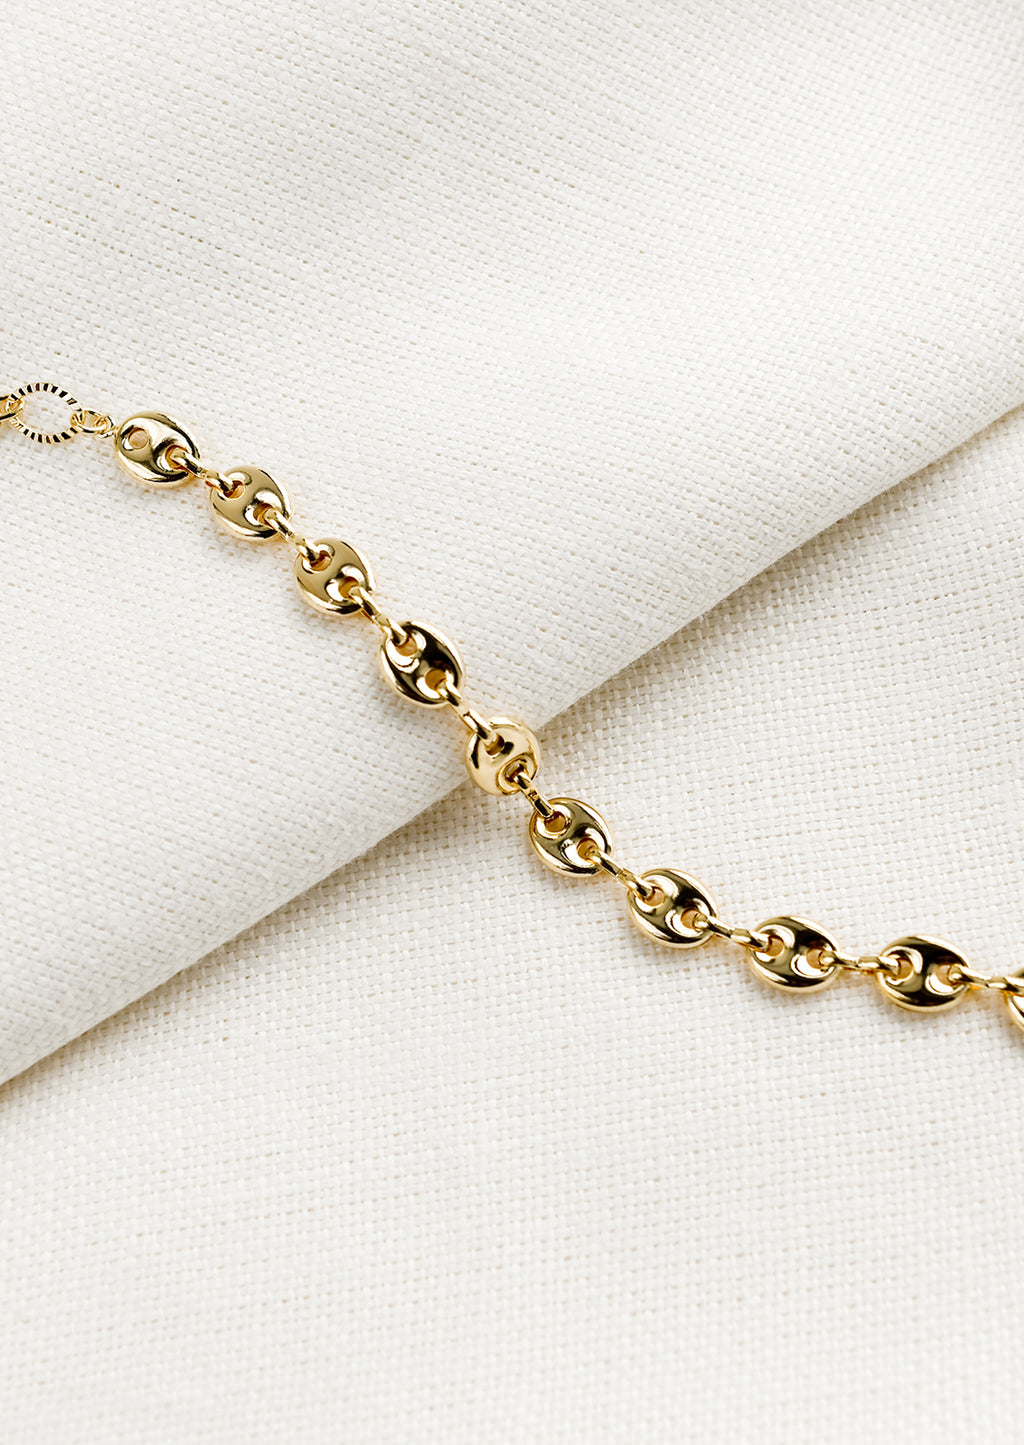 1: A gold bracelet with puffy mariner chain.